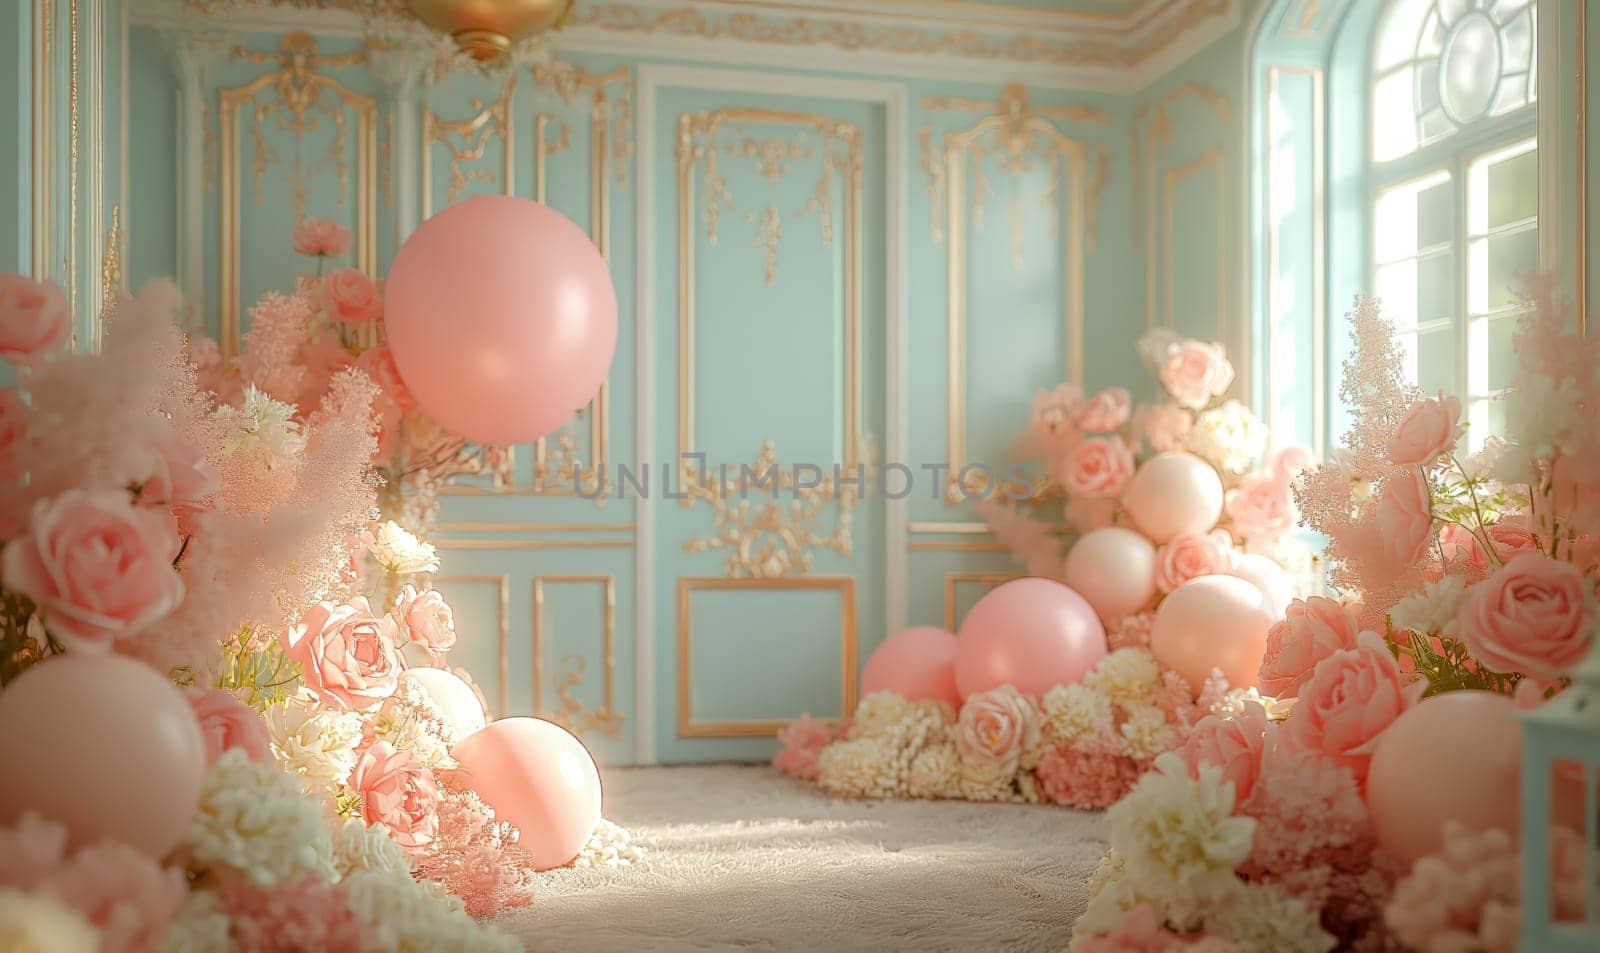 A room packed with colorful balloons and blooming flowers.